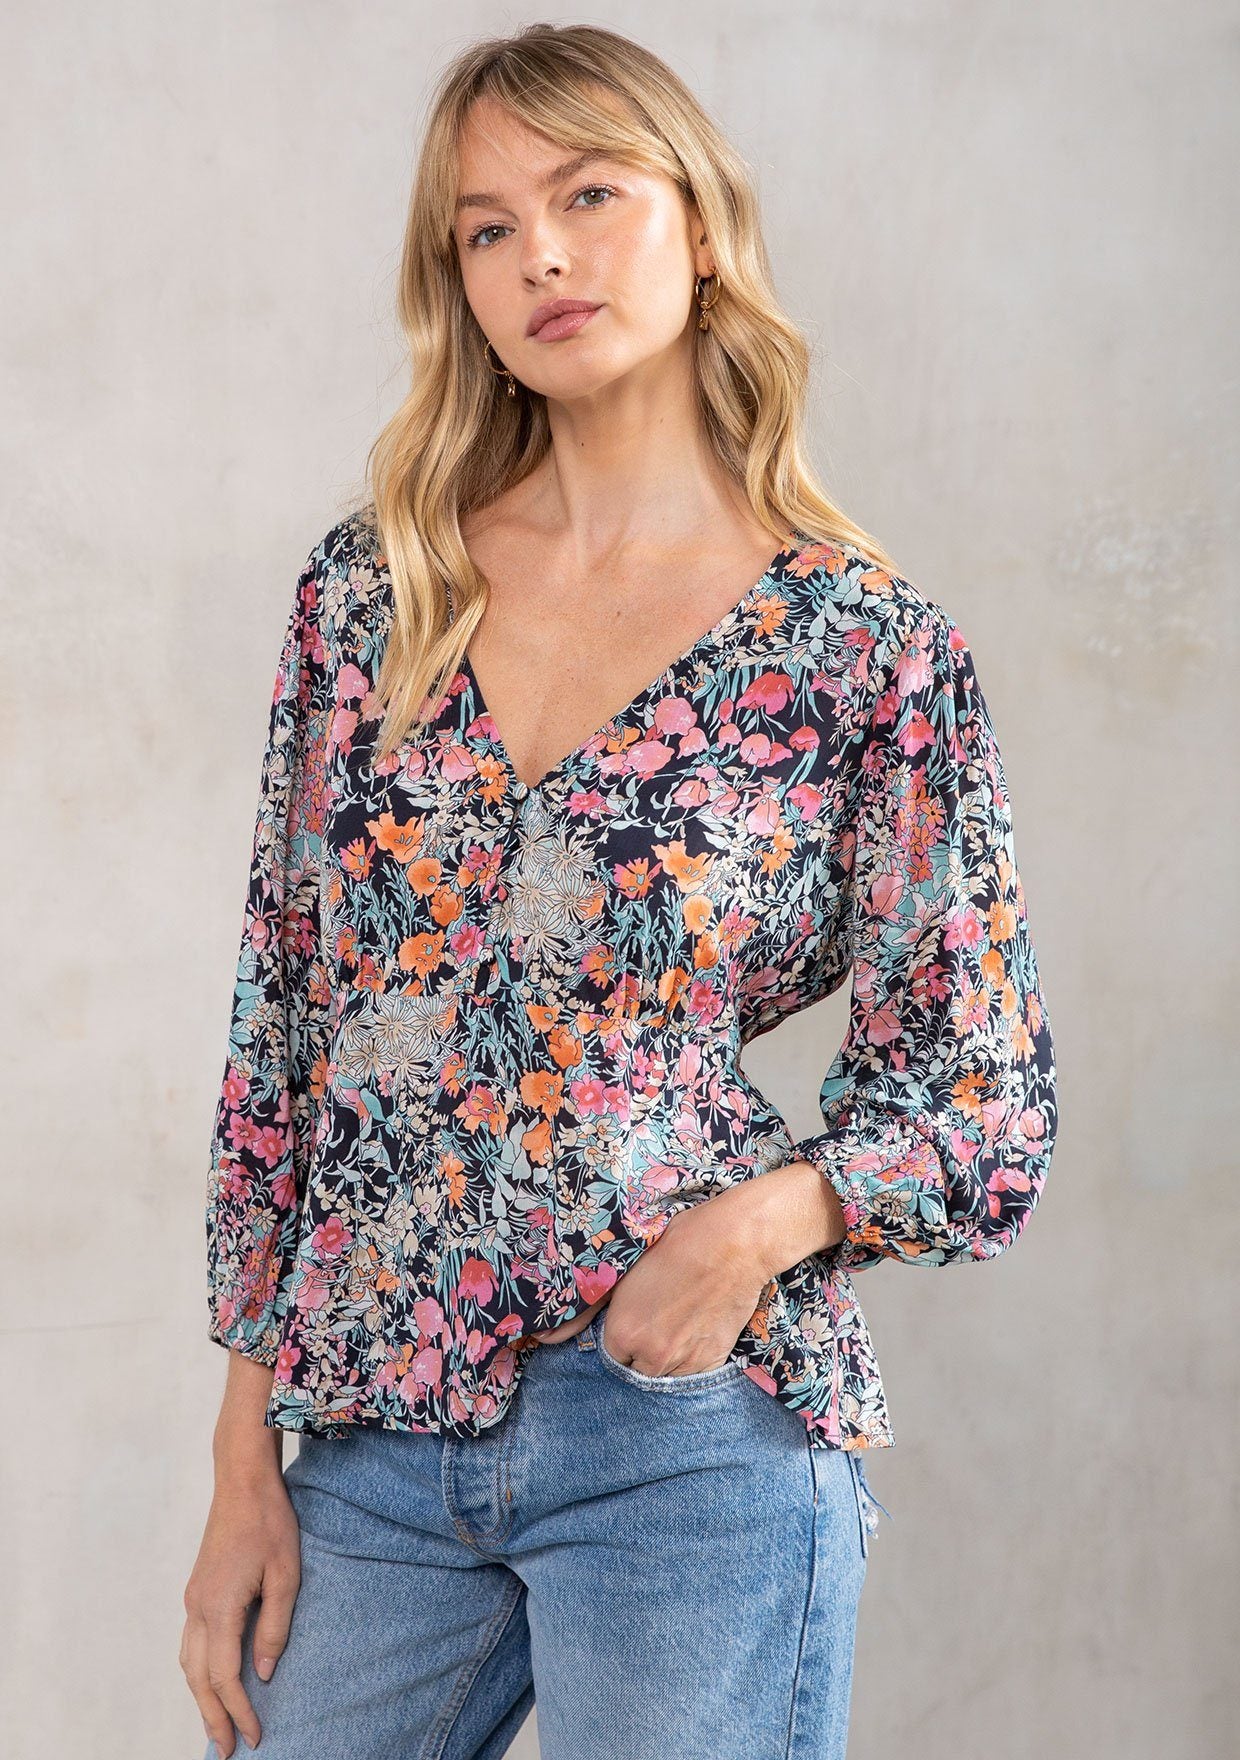 [Color: Black/Pink] A model wearing a versatile bohemian black and pink vintage floral print blouse. With a peplum waist, voluminous three quarter length sleeves, and a self covered button front.